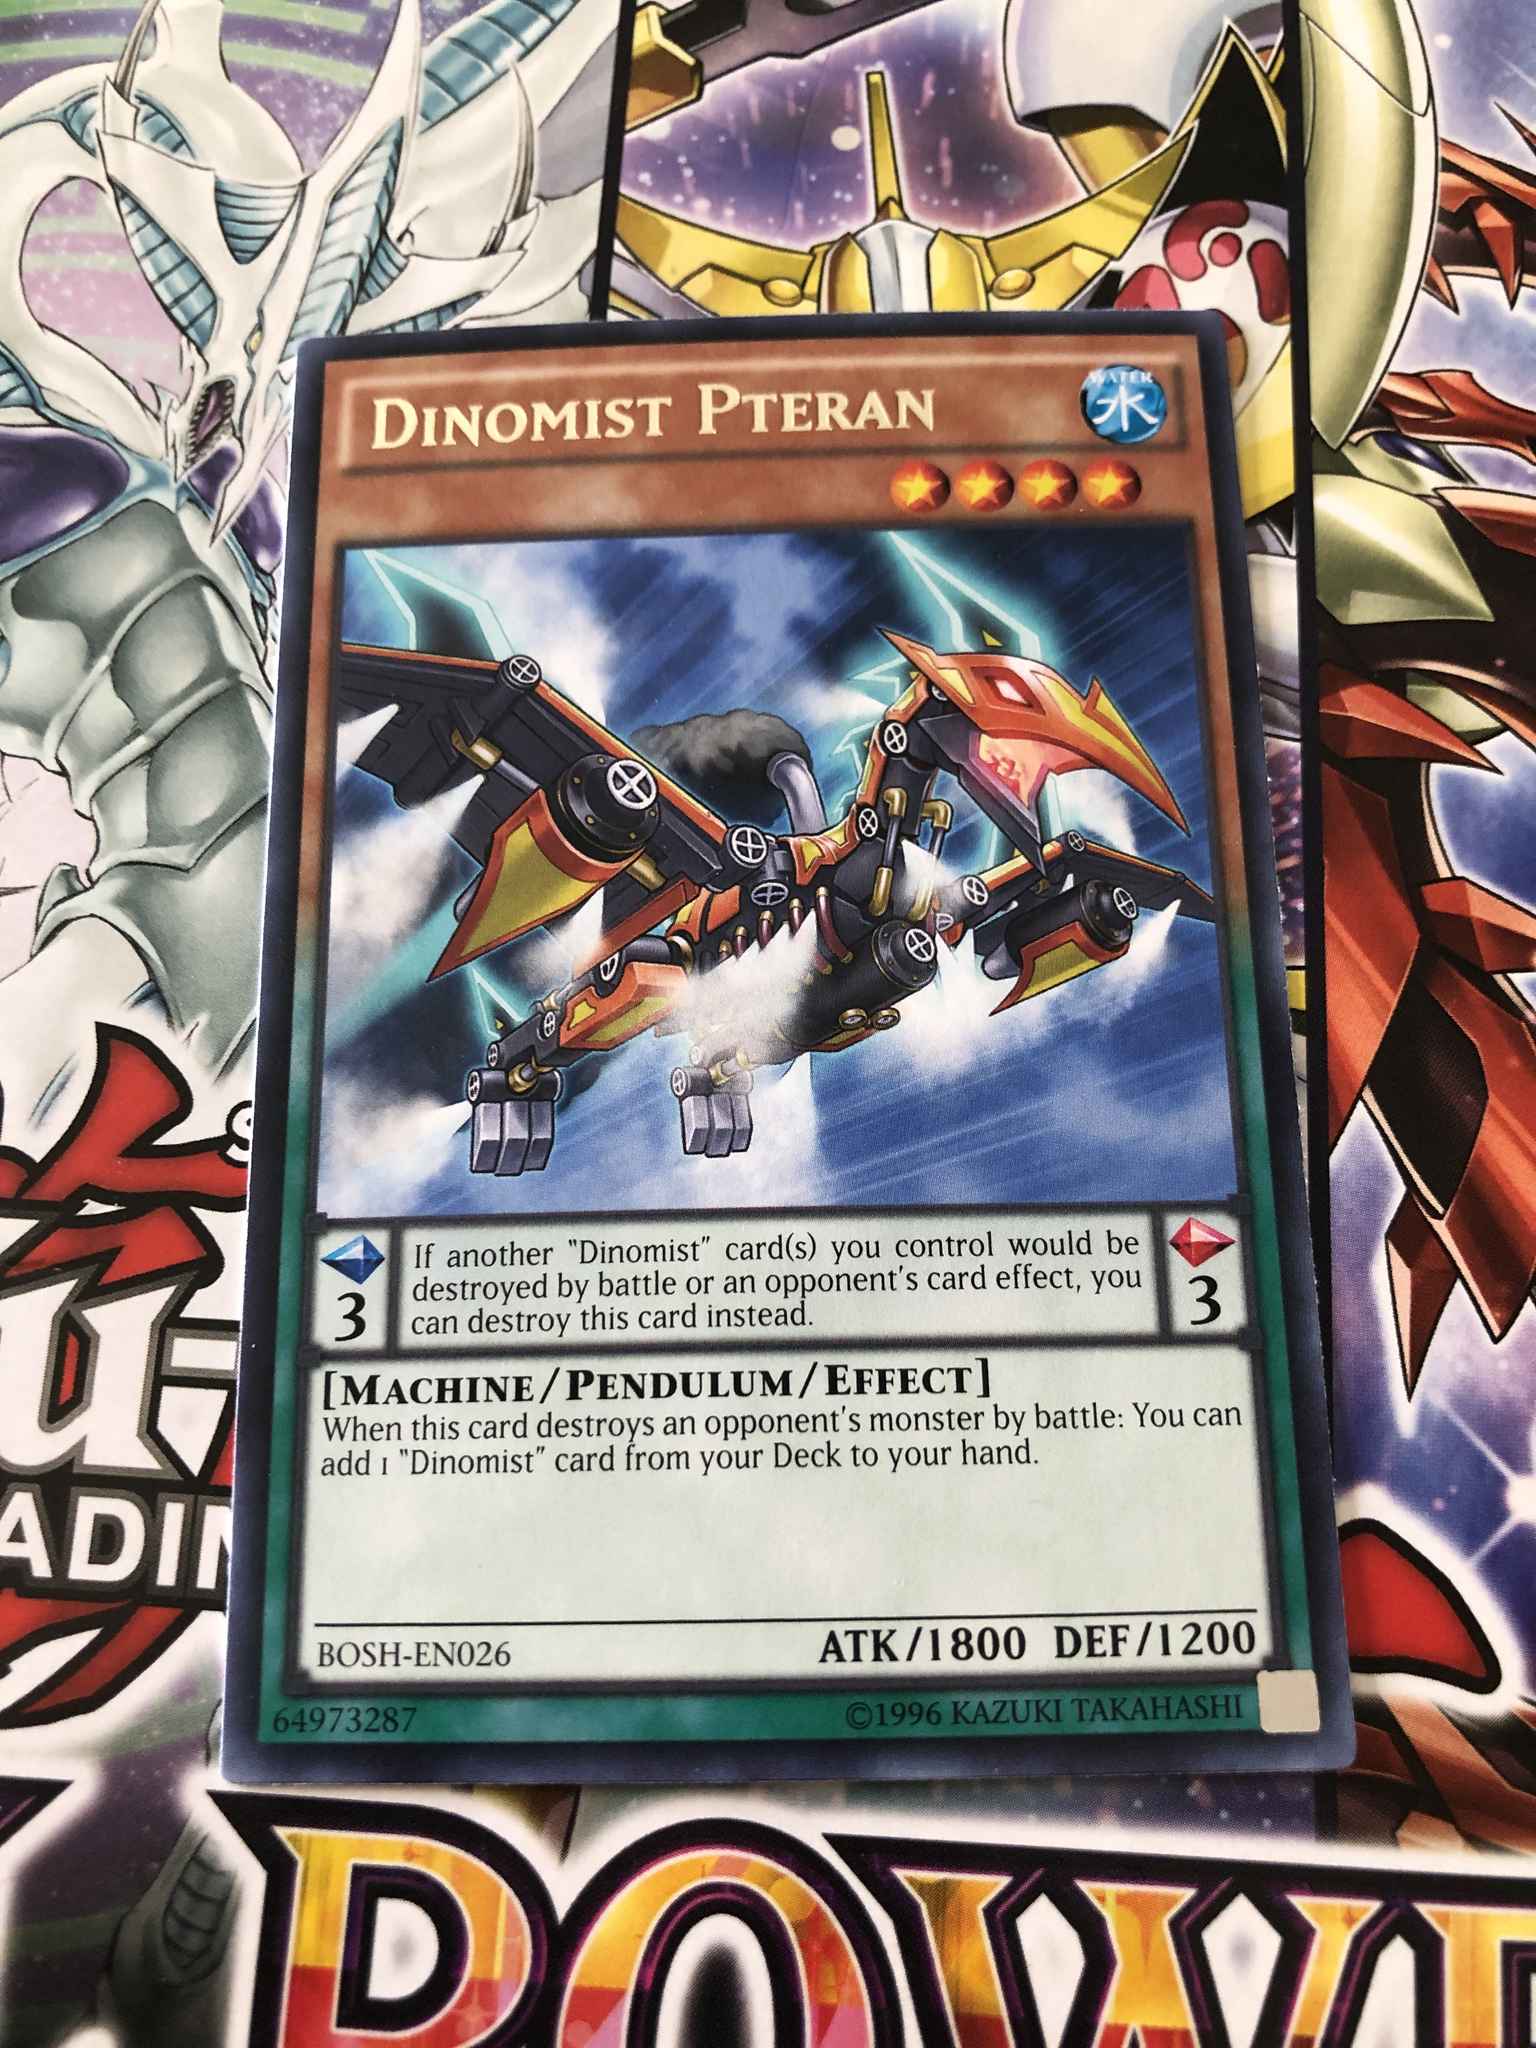 Dinomist Pteran Dinomist Pteran Breakers Of Shadow Yugioh Online Gaming Store For Cards Miniatures Singles Packs Booster Boxes